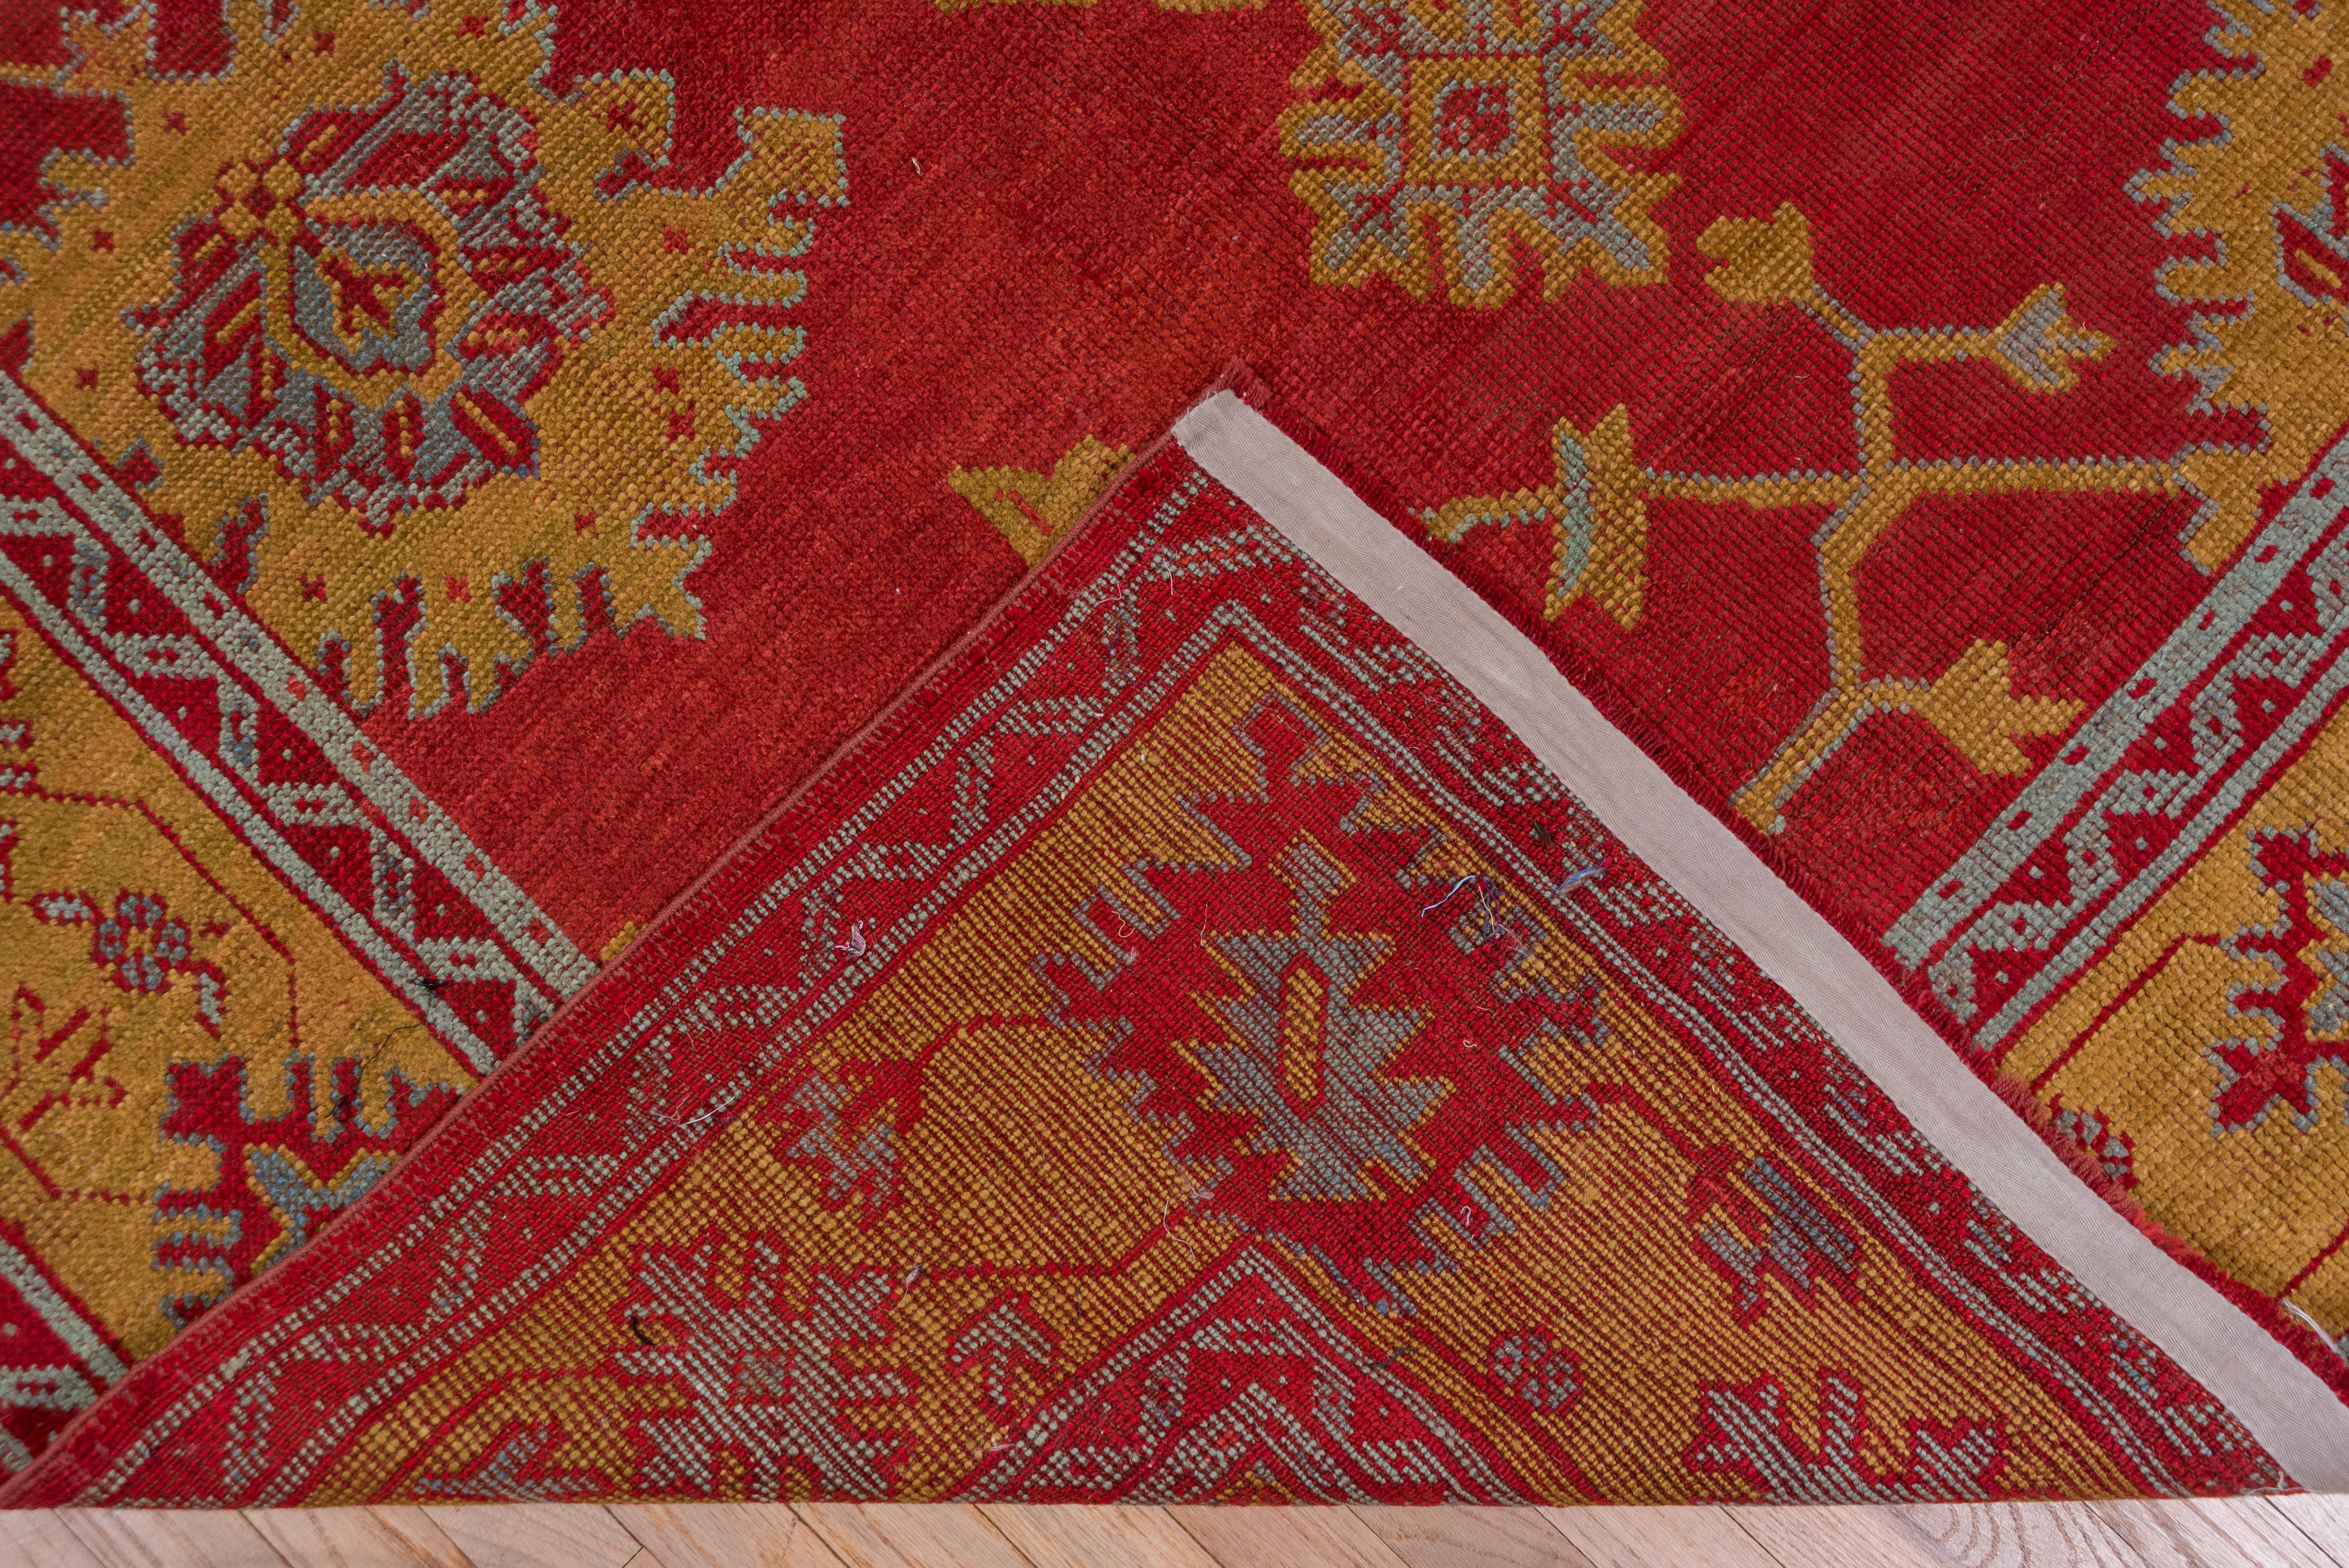 Antique Turkish Red Oushak Carpet, Yellow Borders, circa 1910s For Sale 1